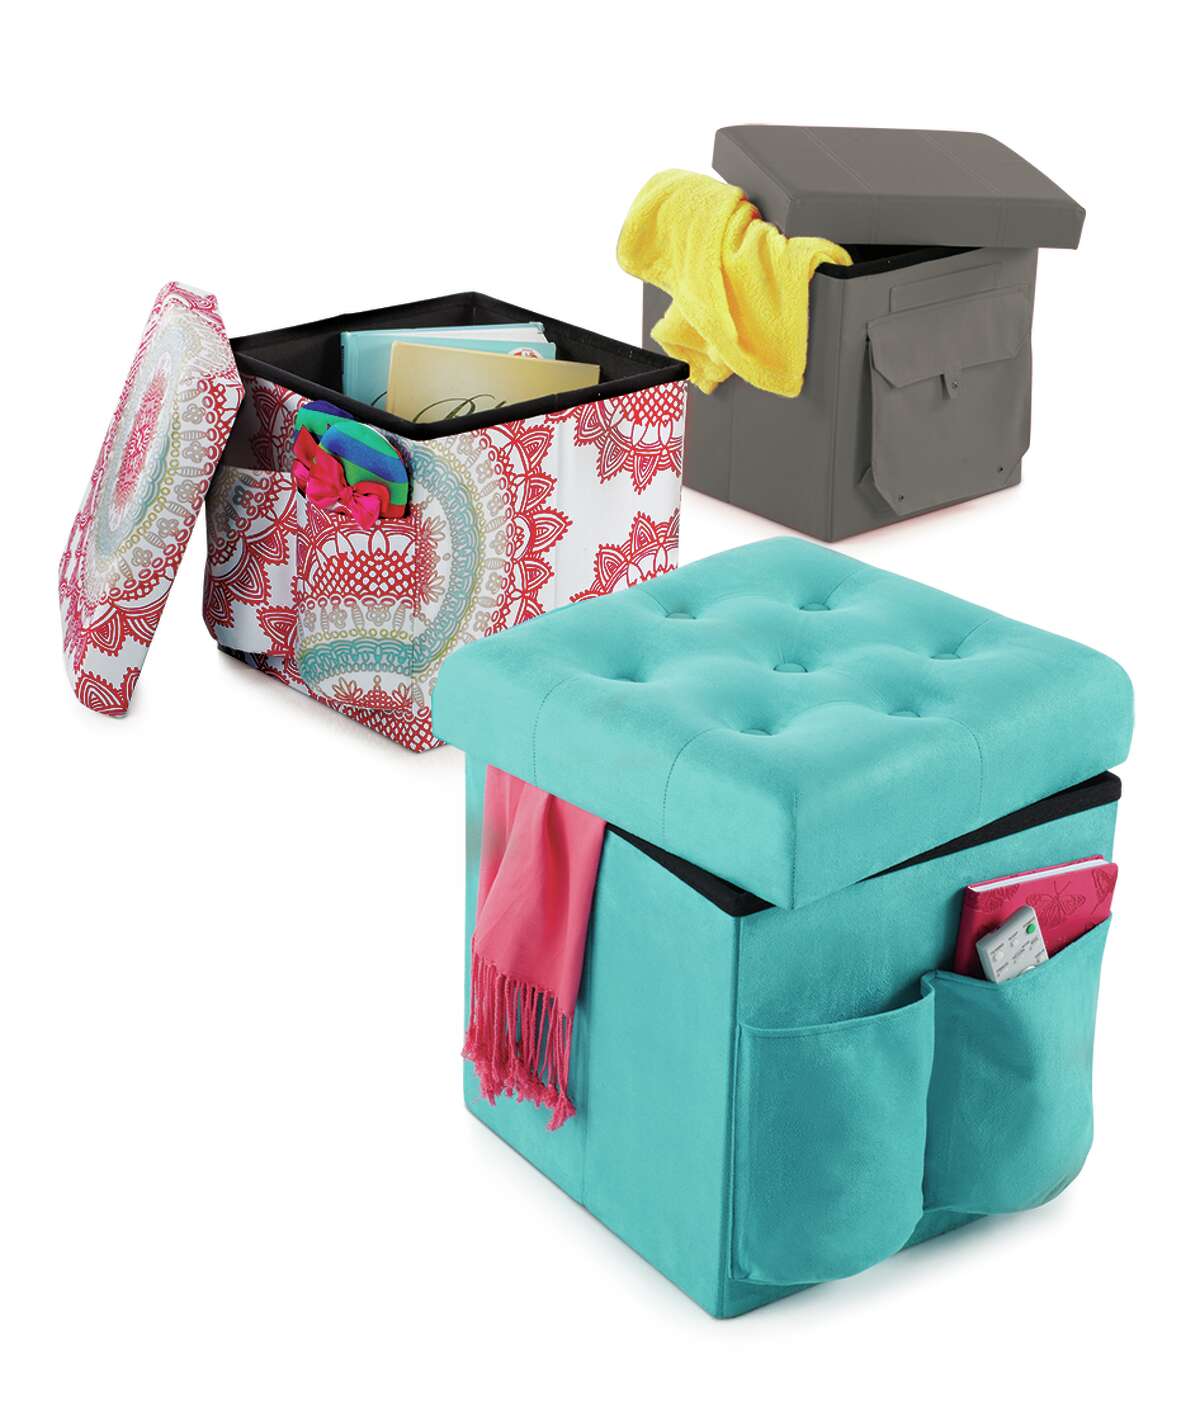 Instead of: A huge trunk Choose: Storage that doubles as seating or that folds up when not in use--or both! Sit and Store Folding Ottoman, $19.99 at Bed Bath & Beyond